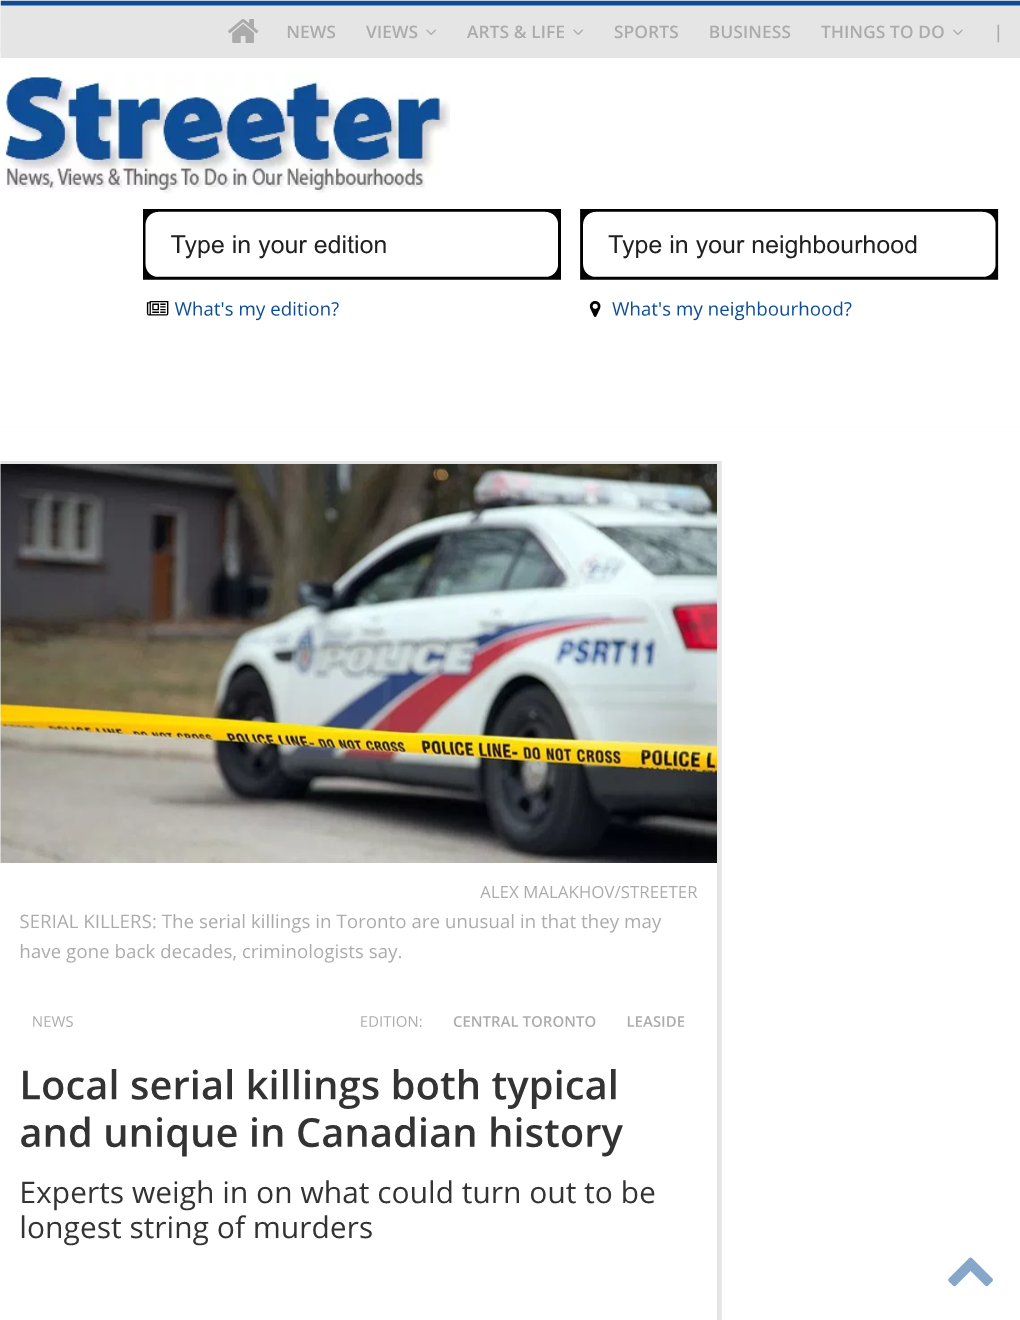 Local Serial Killings Both Typical and Unique in Canadian History